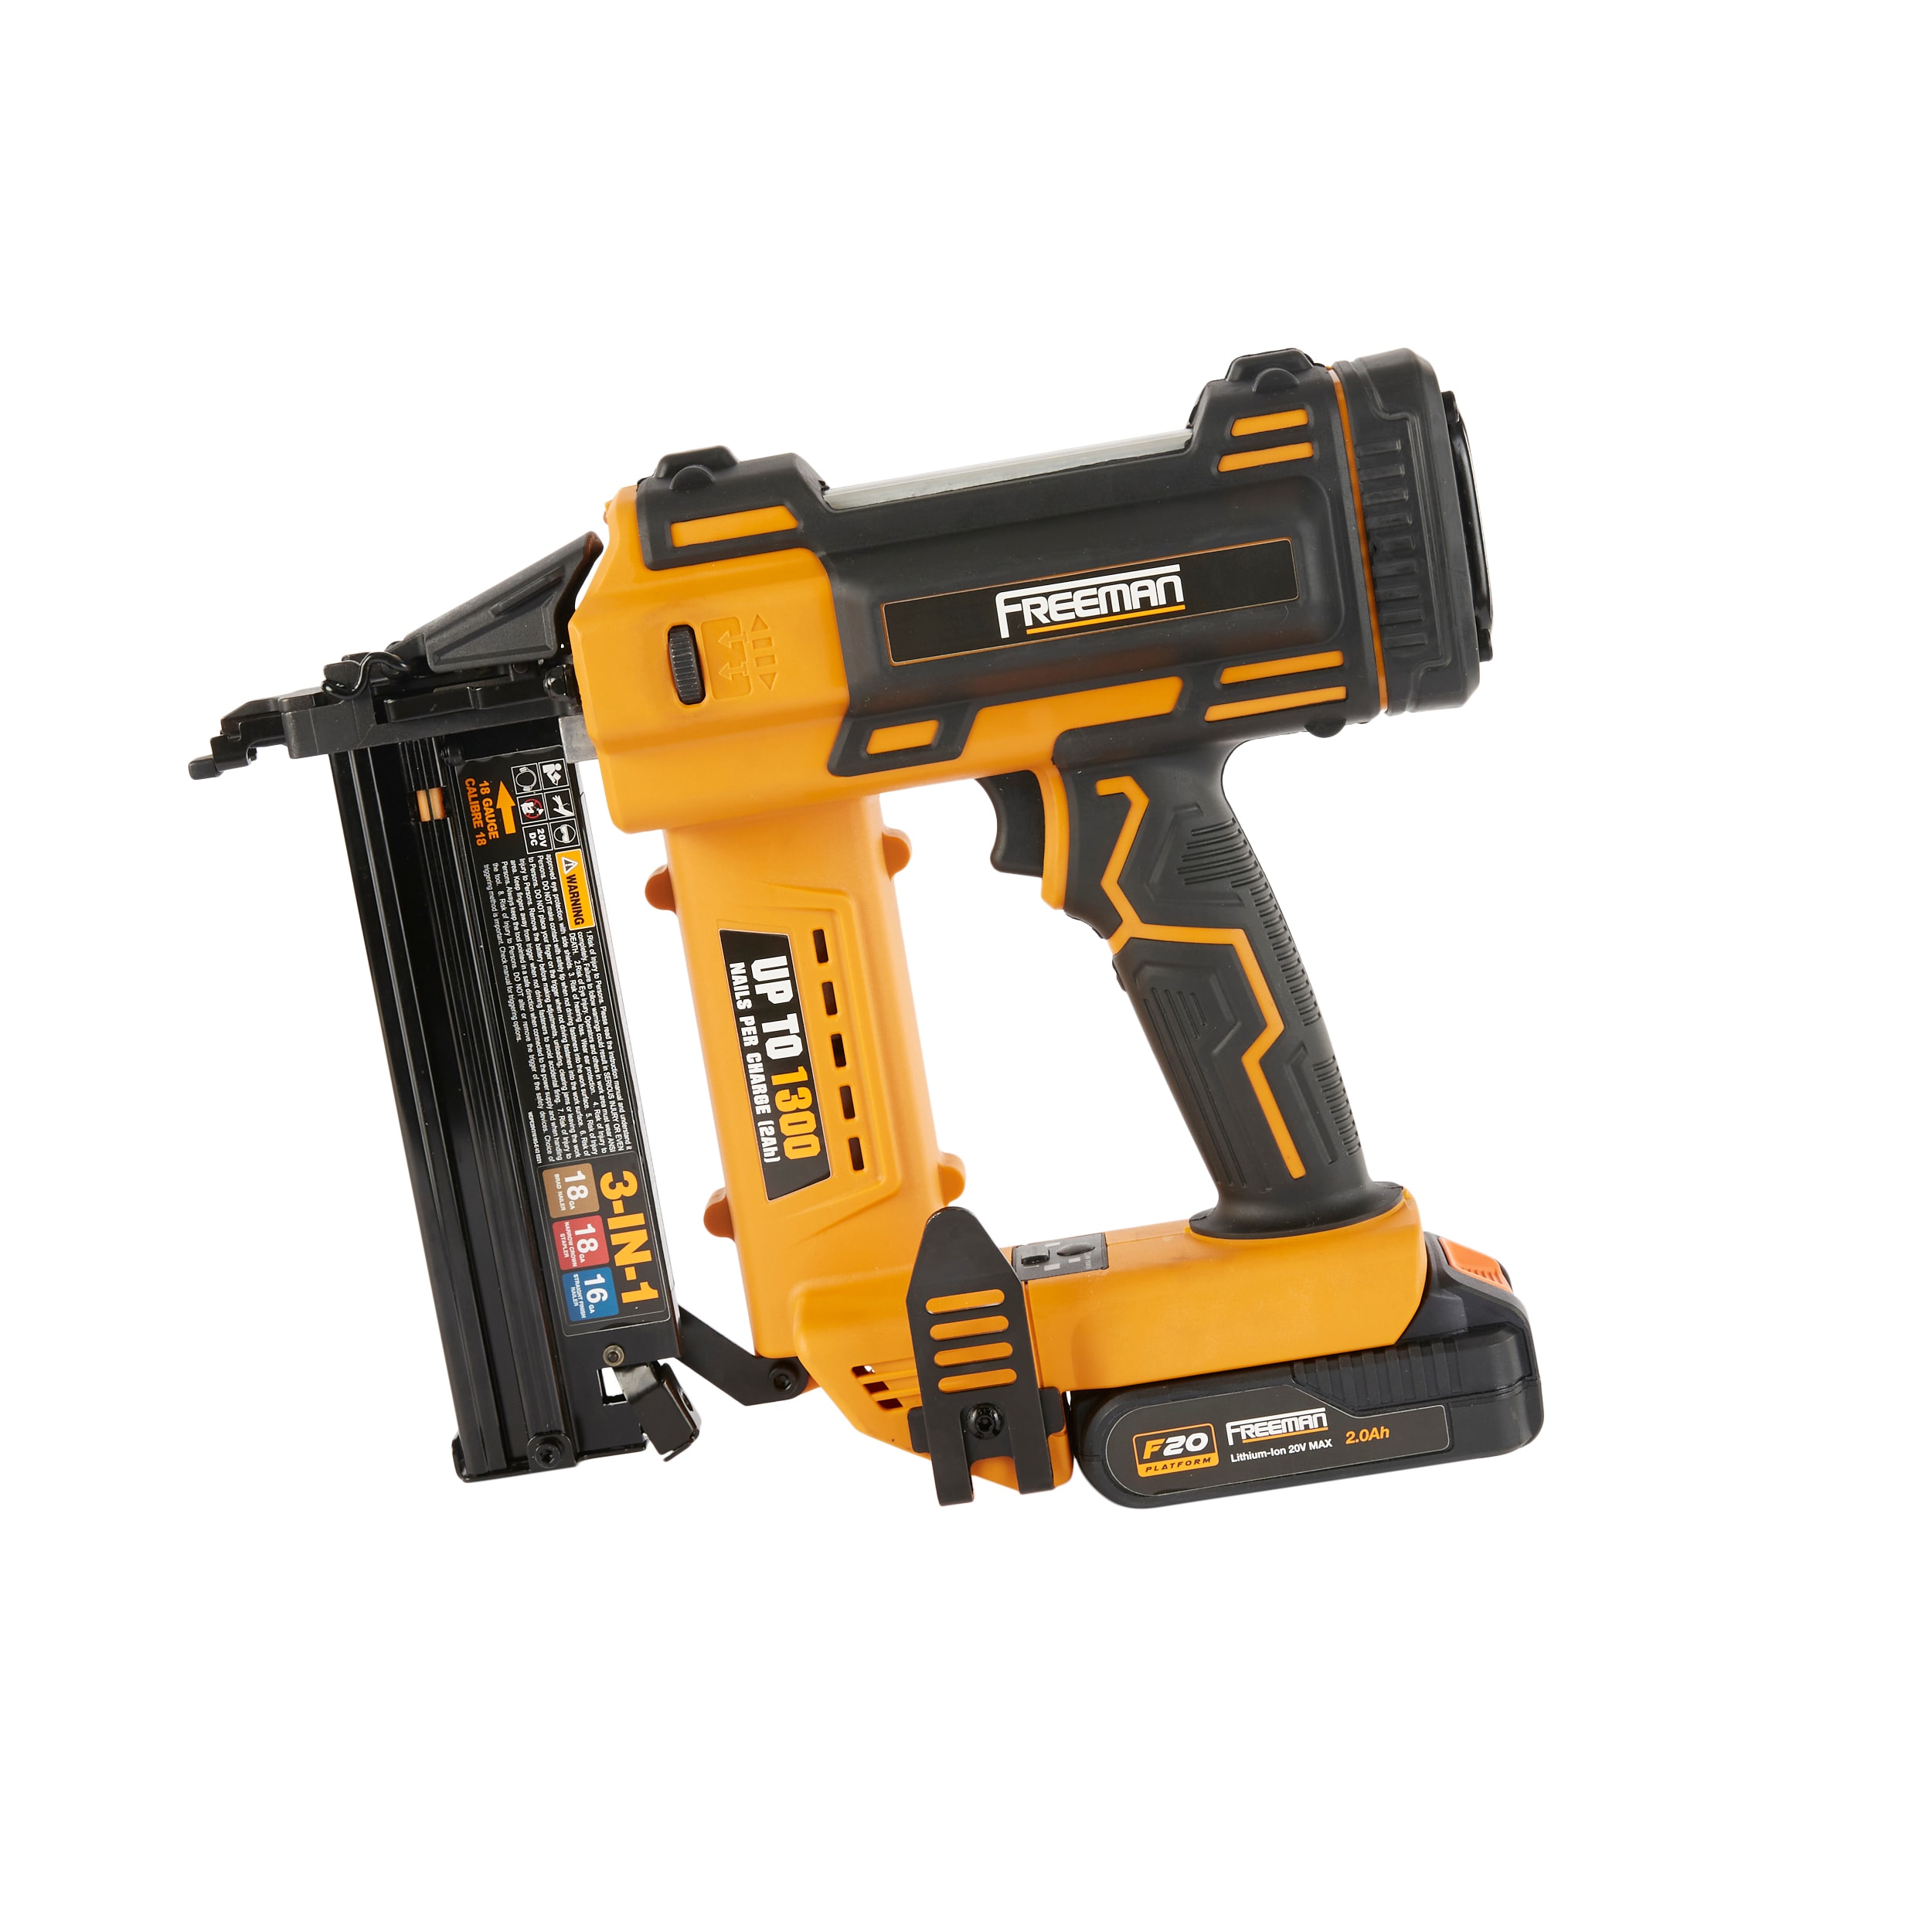 THINKWORK 20V 18 Gauge Cordless Brad Nailer, Durable Nail Gun Battery  Powered - (2 in 1 Dual Mode) with Powerful Battery&Fast Charger, 1000  Nails